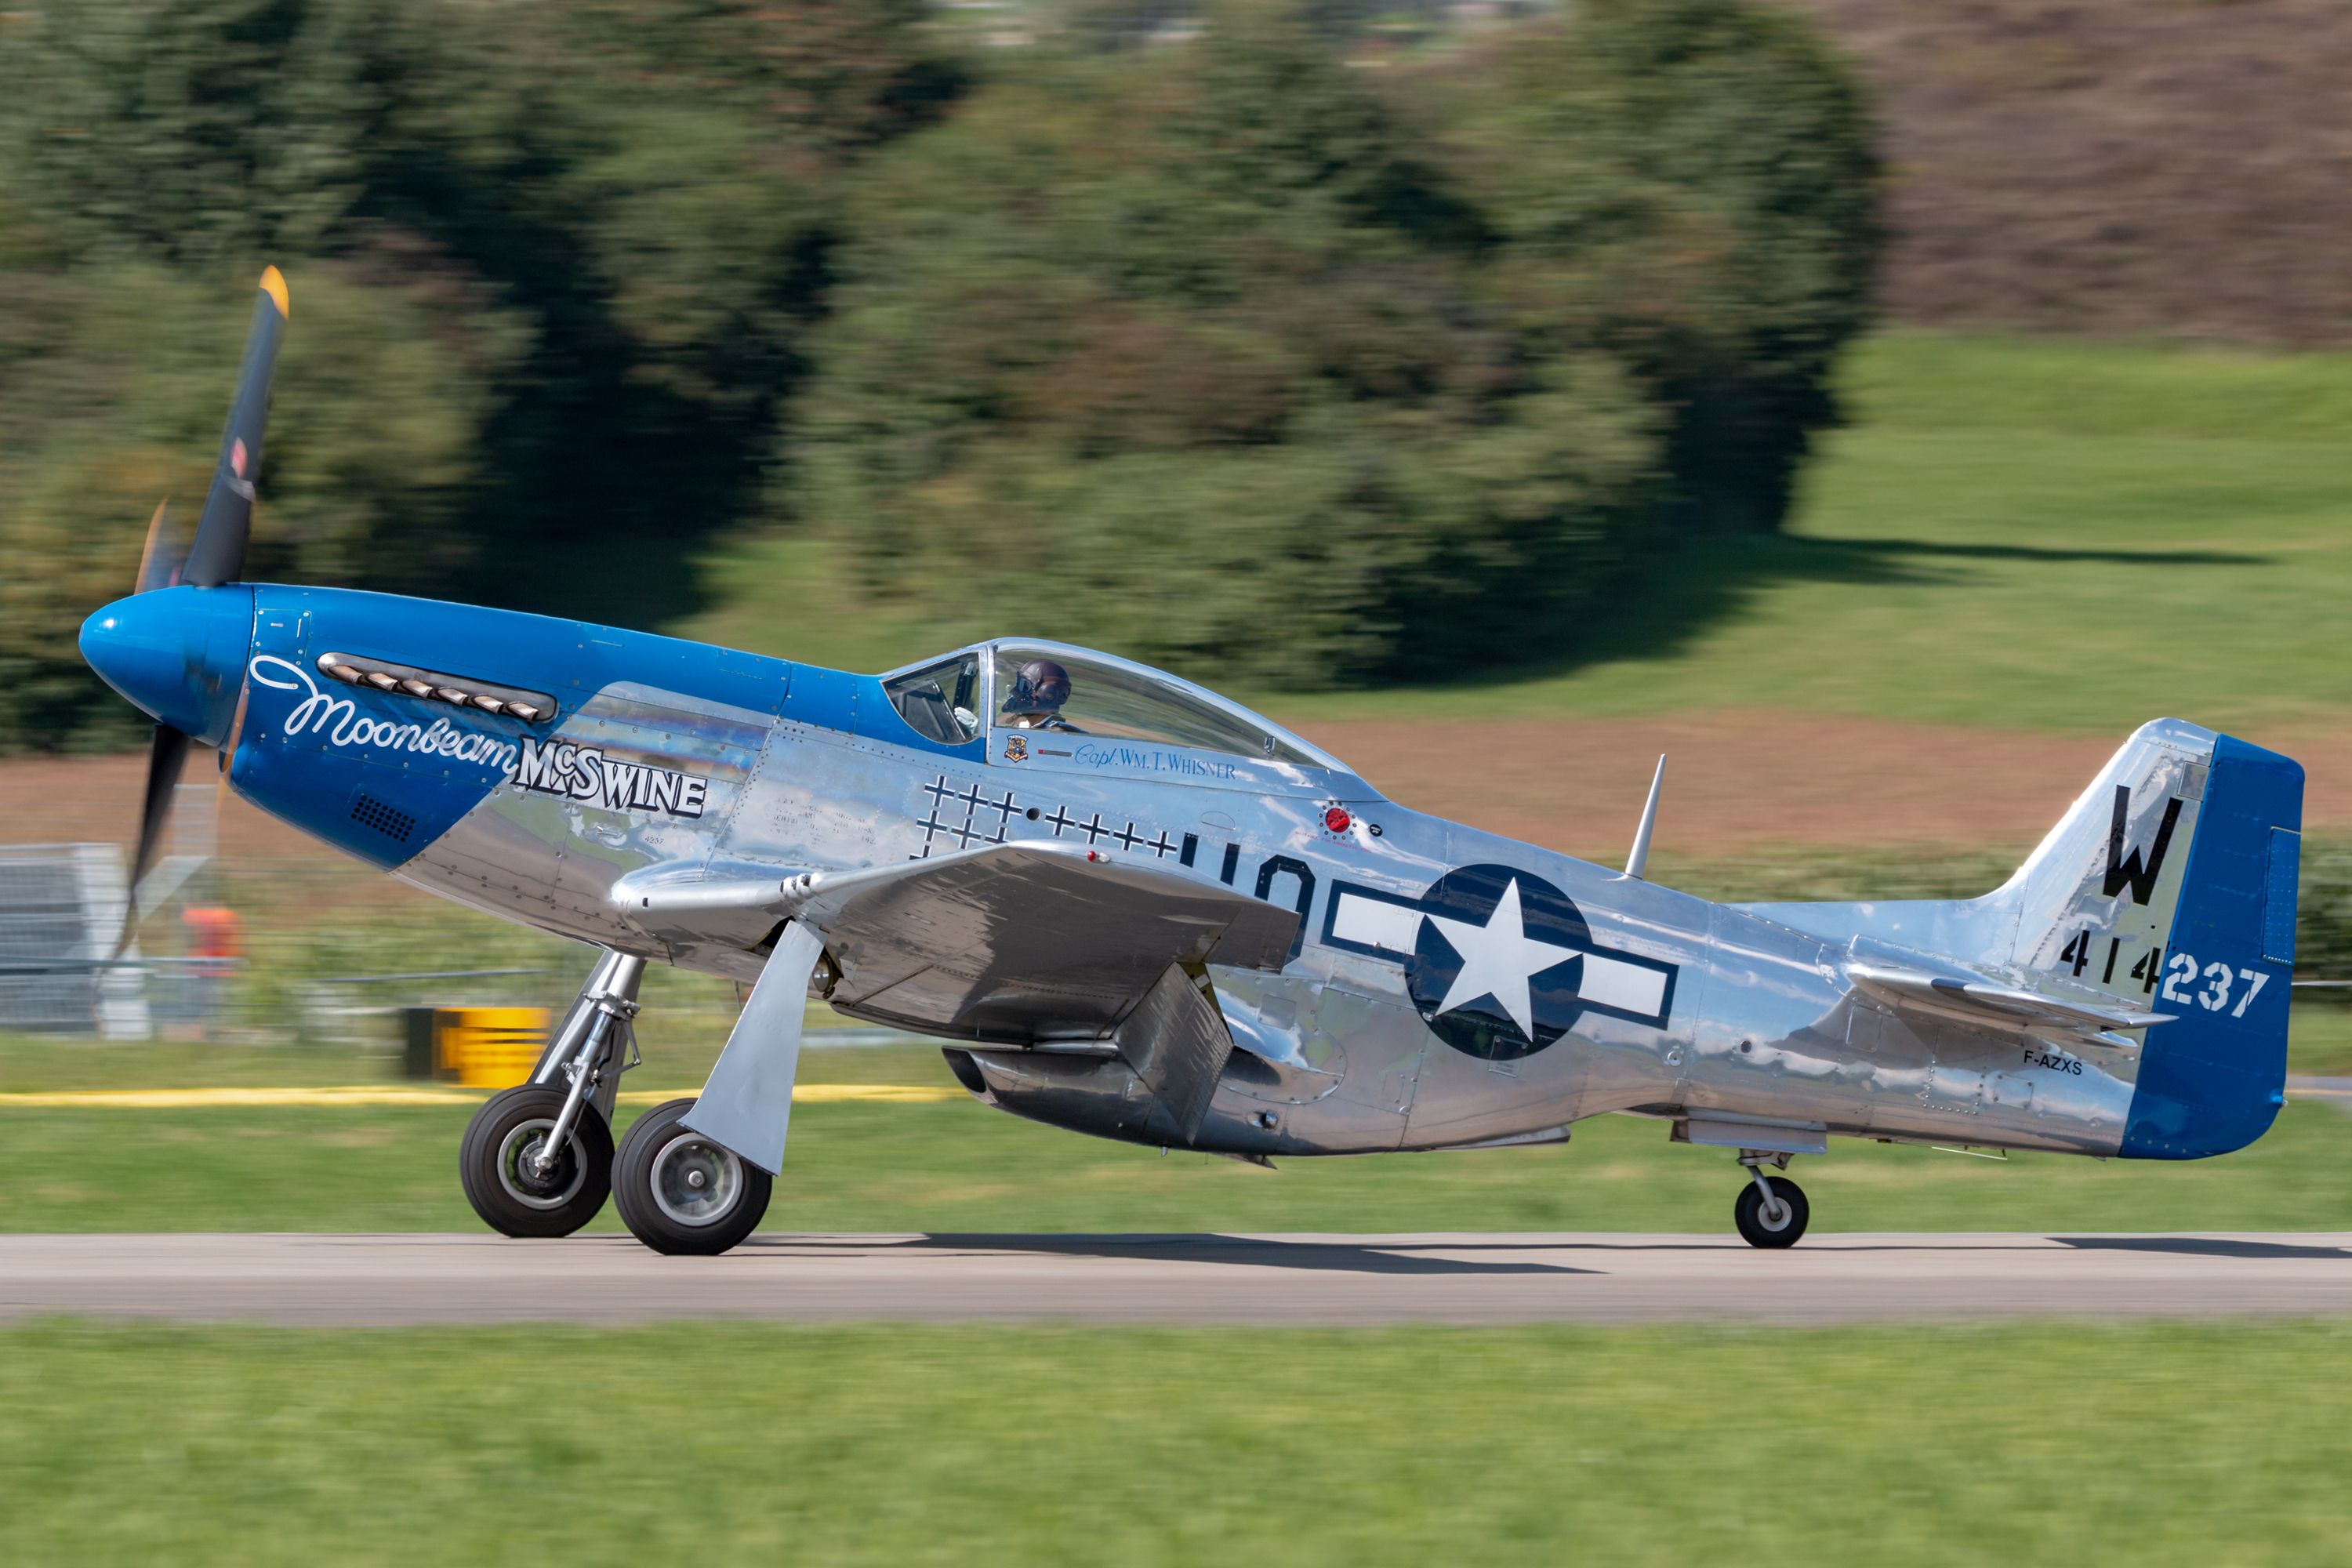 A North American P-51 Mustang on the runway.